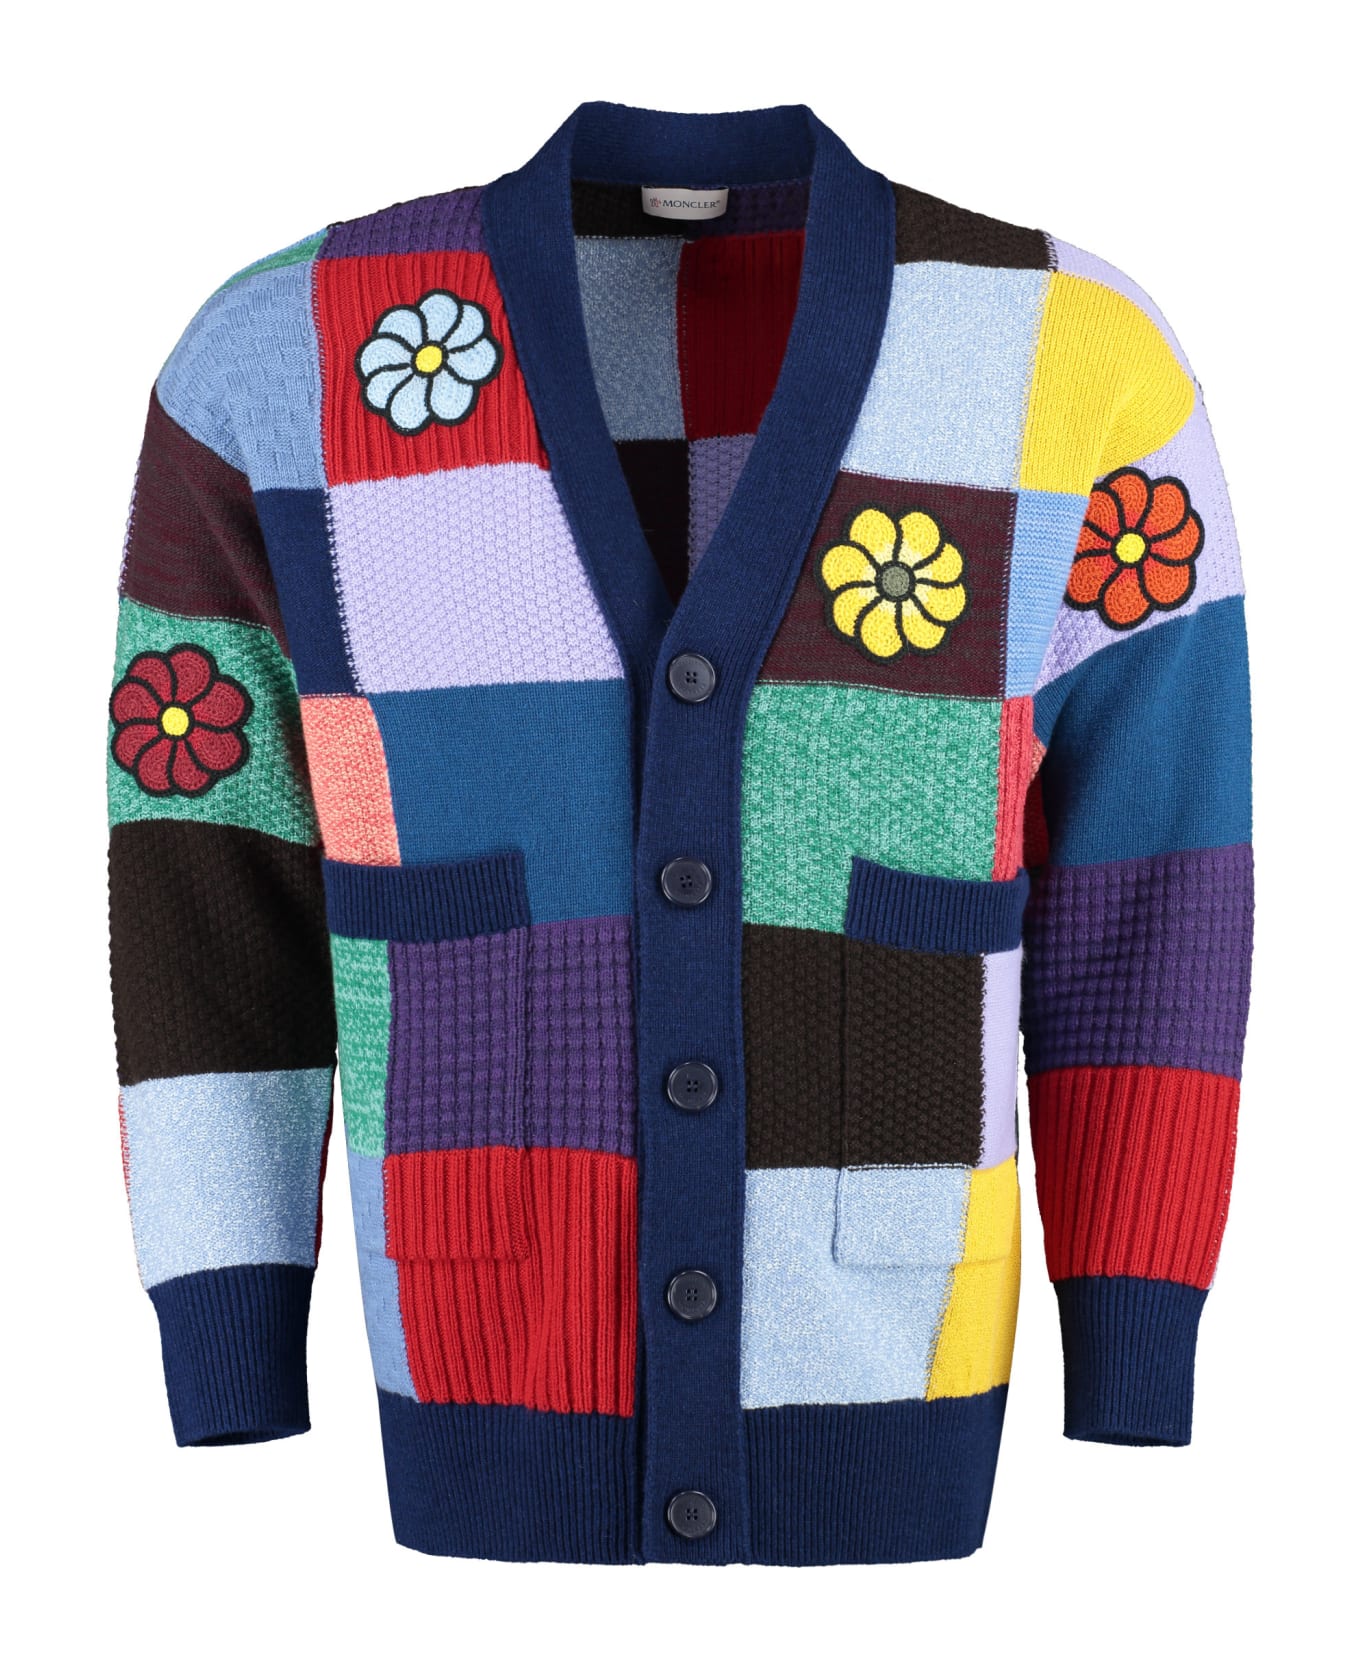 Moncler Genius 1 Moncler Jw Anderson - Wool And Cashmere Cardigan - Multicolor